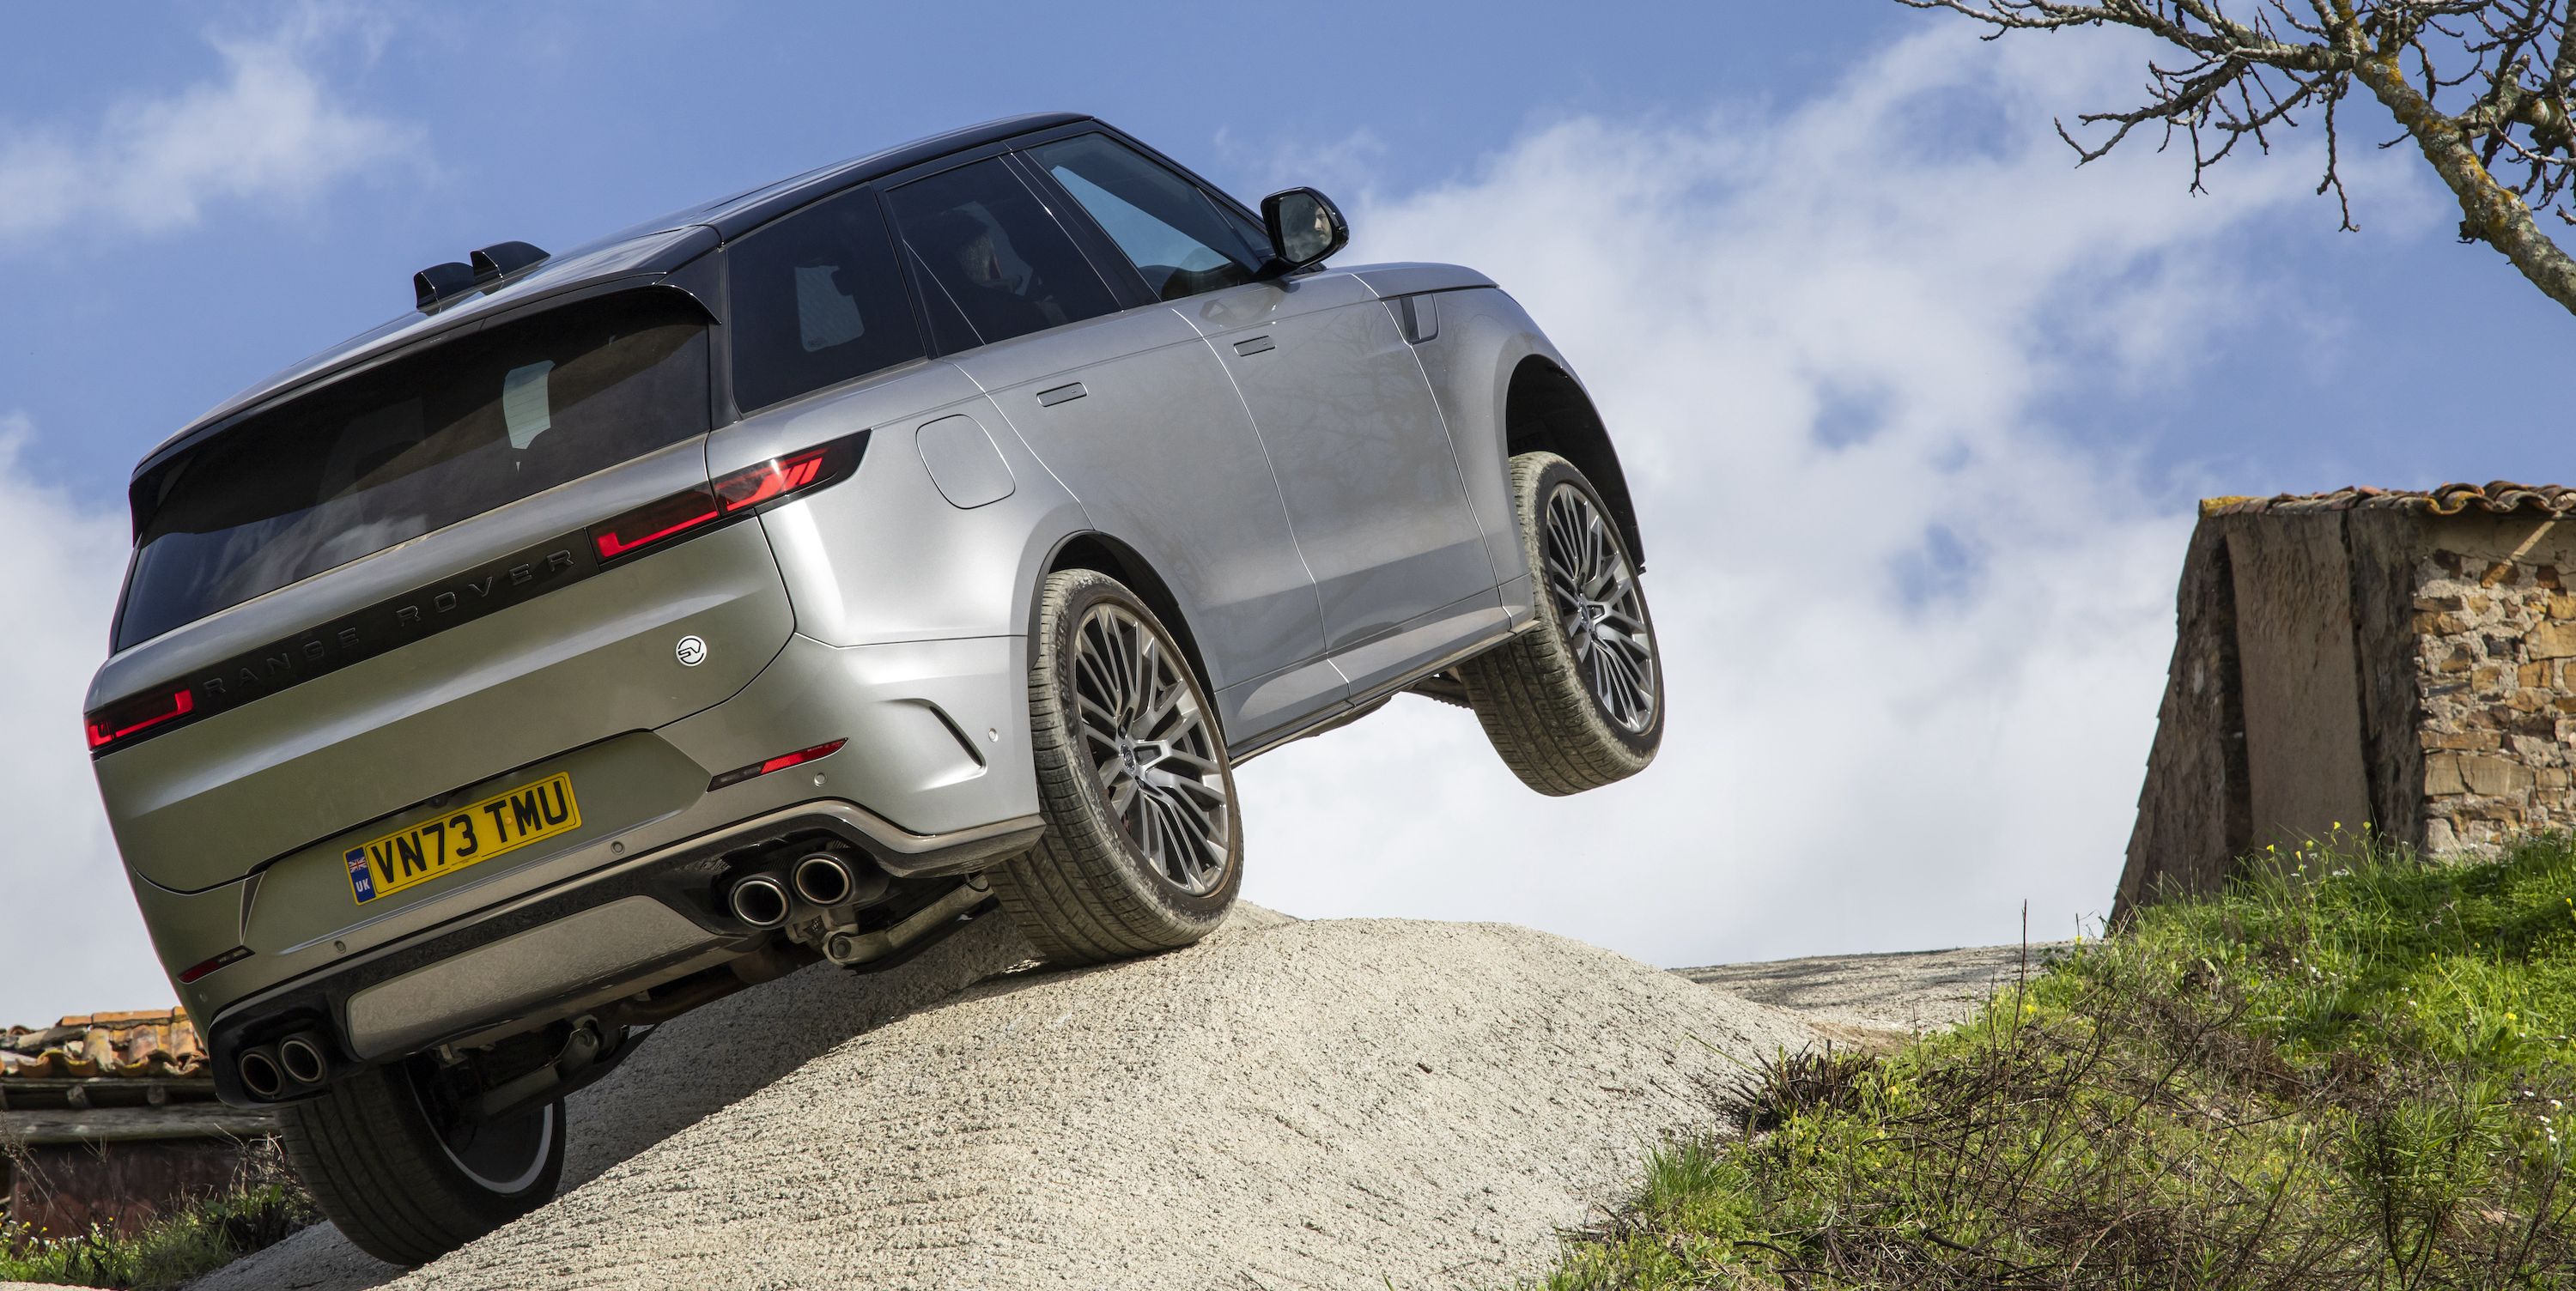 Range Rover Sport SV: The Ultimate Road Rover